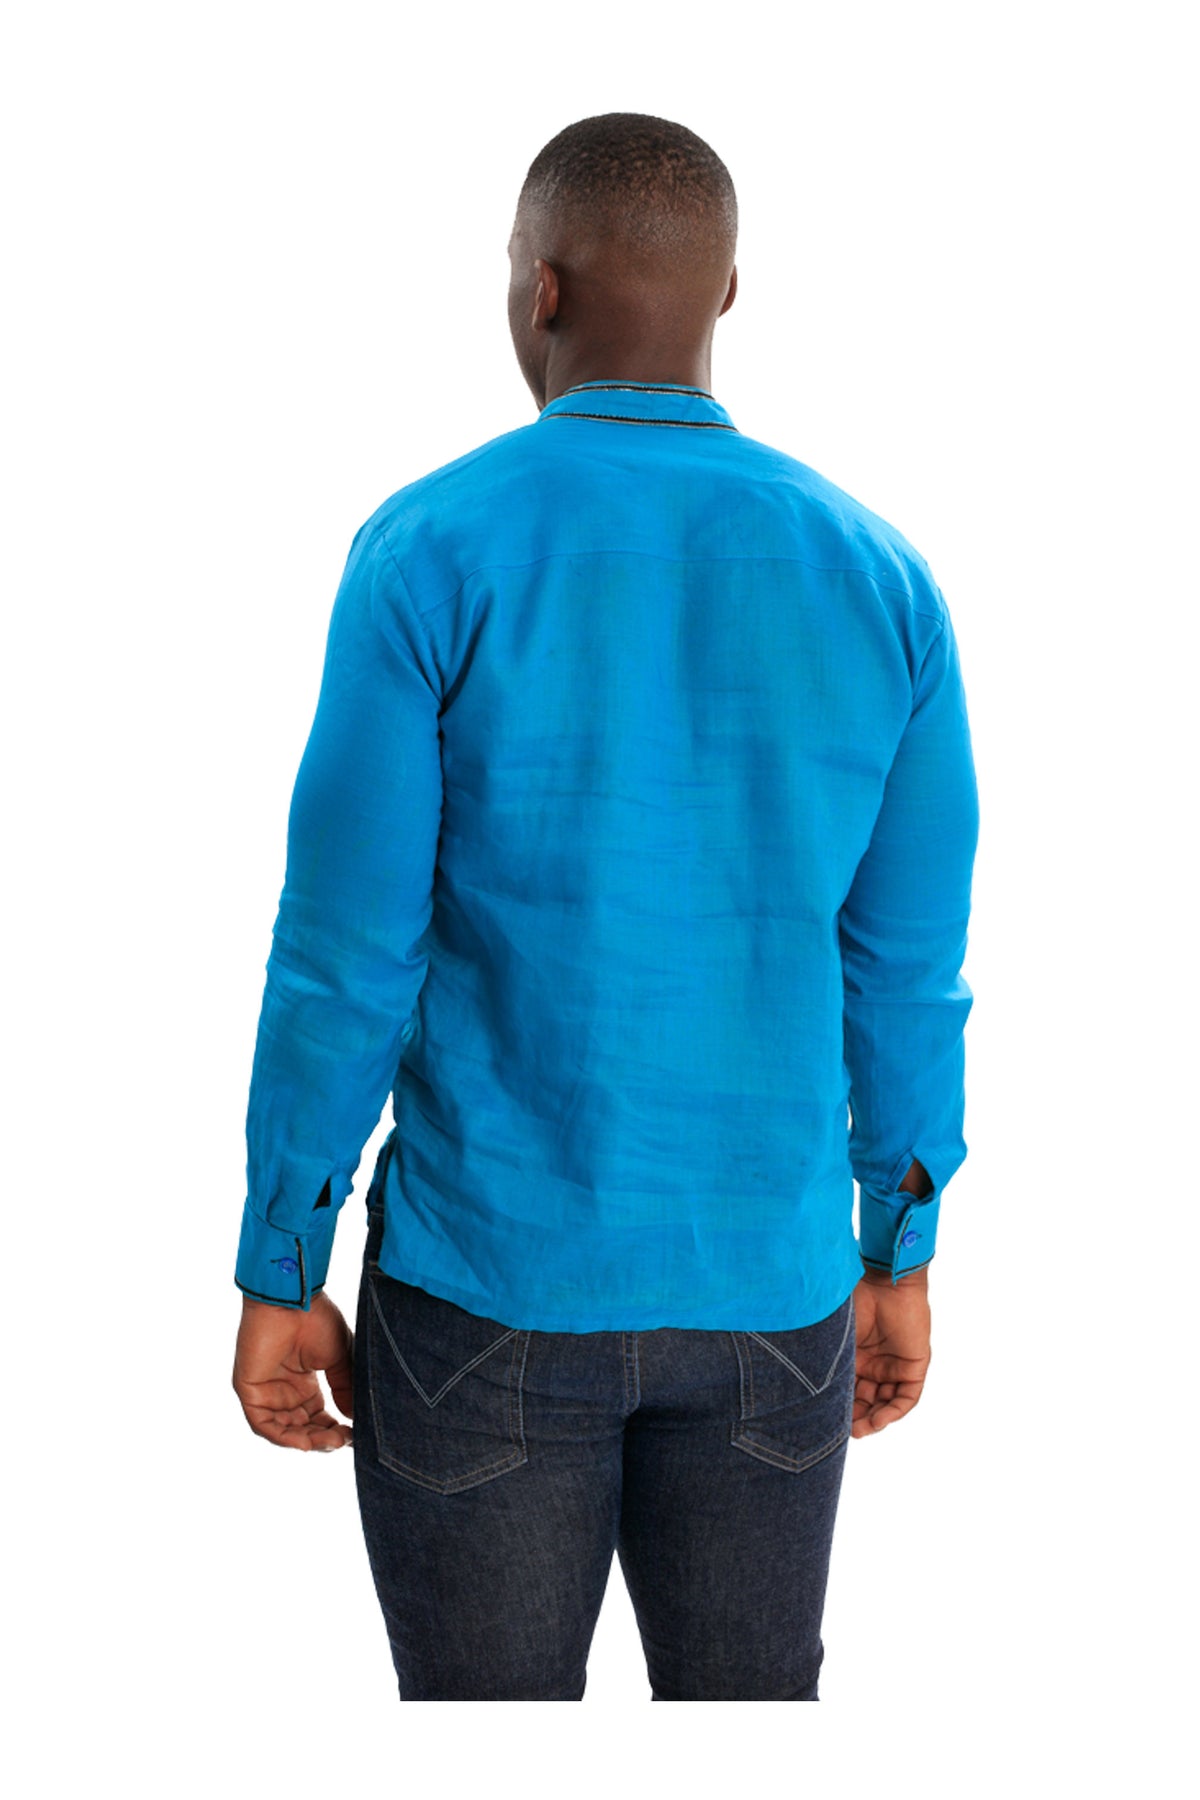 I Represent Today's Africa | Men's Embroidered Long Sleeve Linen Shirt